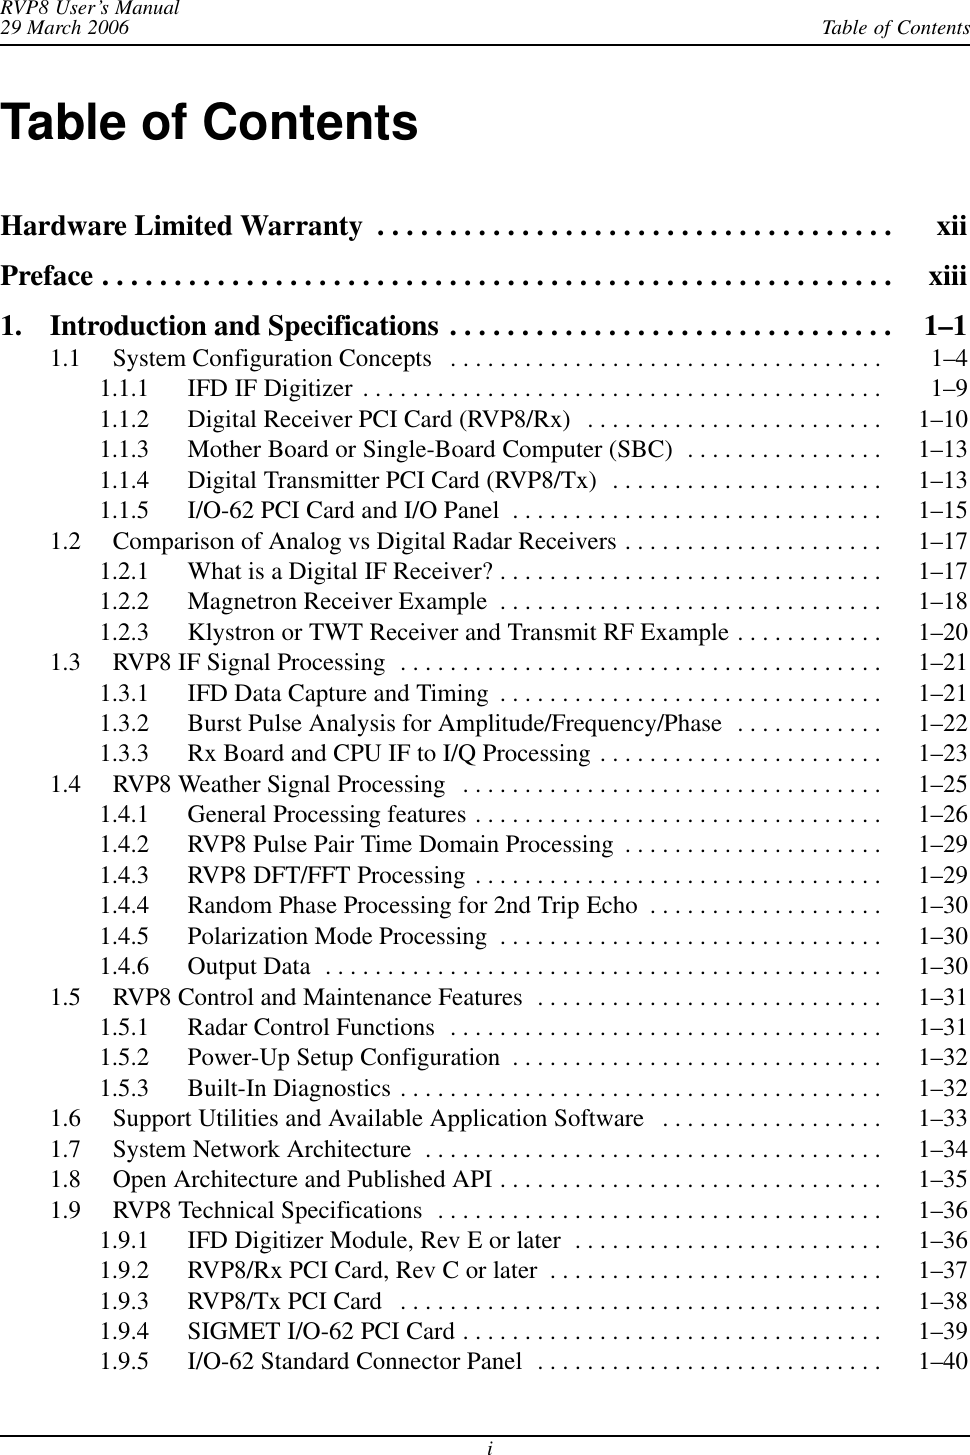 Table of ContentsRVP8 User’s Manual29 March 2006iTable of ContentsHardware Limited Warranty xii . . . . . . . . . . . . . . . . . . . . . . . . . . . . . . . . . . . . Preface xiii . . . . . . . . . . . . . . . . . . . . . . . . . . . . . . . . . . . . . . . . . . . . . . . . . . . . . . . 1. Introduction and Specifications 1–1 . . . . . . . . . . . . . . . . . . . . . . . . . . . . . . . 1.1 System Configuration Concepts 1–4 . . . . . . . . . . . . . . . . . . . . . . . . . . . . . . . . . . . 1.1.1 IFD IF Digitizer 1–9 . . . . . . . . . . . . . . . . . . . . . . . . . . . . . . . . . . . . . . . . . . 1.1.2 Digital Receiver PCI Card (RVP8/Rx) 1–10 . . . . . . . . . . . . . . . . . . . . . . . . 1.1.3 Mother Board or Single-Board Computer (SBC) 1–13 . . . . . . . . . . . . . . . . 1.1.4 Digital Transmitter PCI Card (RVP8/Tx) 1–13 . . . . . . . . . . . . . . . . . . . . . . 1.1.5 I/O-62 PCI Card and I/O Panel 1–15 . . . . . . . . . . . . . . . . . . . . . . . . . . . . . . 1.2 Comparison of Analog vs Digital Radar Receivers 1–17 . . . . . . . . . . . . . . . . . . . . . 1.2.1 What is a Digital IF Receiver? 1–17 . . . . . . . . . . . . . . . . . . . . . . . . . . . . . . . 1.2.2 Magnetron Receiver Example 1–18 . . . . . . . . . . . . . . . . . . . . . . . . . . . . . . . 1.2.3 Klystron or TWT Receiver and Transmit RF Example 1–20 . . . . . . . . . . . . 1.3 RVP8 IF Signal Processing 1–21 . . . . . . . . . . . . . . . . . . . . . . . . . . . . . . . . . . . . . . . 1.3.1 IFD Data Capture and Timing 1–21 . . . . . . . . . . . . . . . . . . . . . . . . . . . . . . . 1.3.2 Burst Pulse Analysis for Amplitude/Frequency/Phase 1–22 . . . . . . . . . . . . 1.3.3 Rx Board and CPU IF to I/Q Processing 1–23 . . . . . . . . . . . . . . . . . . . . . . . 1.4 RVP8 Weather Signal Processing 1–25 . . . . . . . . . . . . . . . . . . . . . . . . . . . . . . . . . . 1.4.1 General Processing features 1–26 . . . . . . . . . . . . . . . . . . . . . . . . . . . . . . . . . 1.4.2 RVP8 Pulse Pair Time Domain Processing 1–29 . . . . . . . . . . . . . . . . . . . . . 1.4.3 RVP8 DFT/FFT Processing 1–29 . . . . . . . . . . . . . . . . . . . . . . . . . . . . . . . . . 1.4.4 Random Phase Processing for 2nd Trip Echo 1–30 . . . . . . . . . . . . . . . . . . . 1.4.5 Polarization Mode Processing 1–30 . . . . . . . . . . . . . . . . . . . . . . . . . . . . . . . 1.4.6 Output Data 1–30 . . . . . . . . . . . . . . . . . . . . . . . . . . . . . . . . . . . . . . . . . . . . . 1.5 RVP8 Control and Maintenance Features 1–31 . . . . . . . . . . . . . . . . . . . . . . . . . . . . 1.5.1 Radar Control Functions 1–31 . . . . . . . . . . . . . . . . . . . . . . . . . . . . . . . . . . . 1.5.2 Power-Up Setup Configuration 1–32 . . . . . . . . . . . . . . . . . . . . . . . . . . . . . . 1.5.3 Built-In Diagnostics 1–32 . . . . . . . . . . . . . . . . . . . . . . . . . . . . . . . . . . . . . . . 1.6 Support Utilities and Available Application Software 1–33 . . . . . . . . . . . . . . . . . . 1.7 System Network Architecture 1–34 . . . . . . . . . . . . . . . . . . . . . . . . . . . . . . . . . . . . . 1.8 Open Architecture and Published API 1–35 . . . . . . . . . . . . . . . . . . . . . . . . . . . . . . . 1.9 RVP8 Technical Specifications 1–36 . . . . . . . . . . . . . . . . . . . . . . . . . . . . . . . . . . . . 1.9.1 IFD Digitizer Module, Rev E or later 1–36 . . . . . . . . . . . . . . . . . . . . . . . . . 1.9.2 RVP8/Rx PCI Card, Rev C or later 1–37 . . . . . . . . . . . . . . . . . . . . . . . . . . . 1.9.3 RVP8/Tx PCI Card 1–38 . . . . . . . . . . . . . . . . . . . . . . . . . . . . . . . . . . . . . . . 1.9.4 SIGMET I/O-62 PCI Card 1–39 . . . . . . . . . . . . . . . . . . . . . . . . . . . . . . . . . . 1.9.5 I/O-62 Standard Connector Panel 1–40 . . . . . . . . . . . . . . . . . . . . . . . . . . . . 